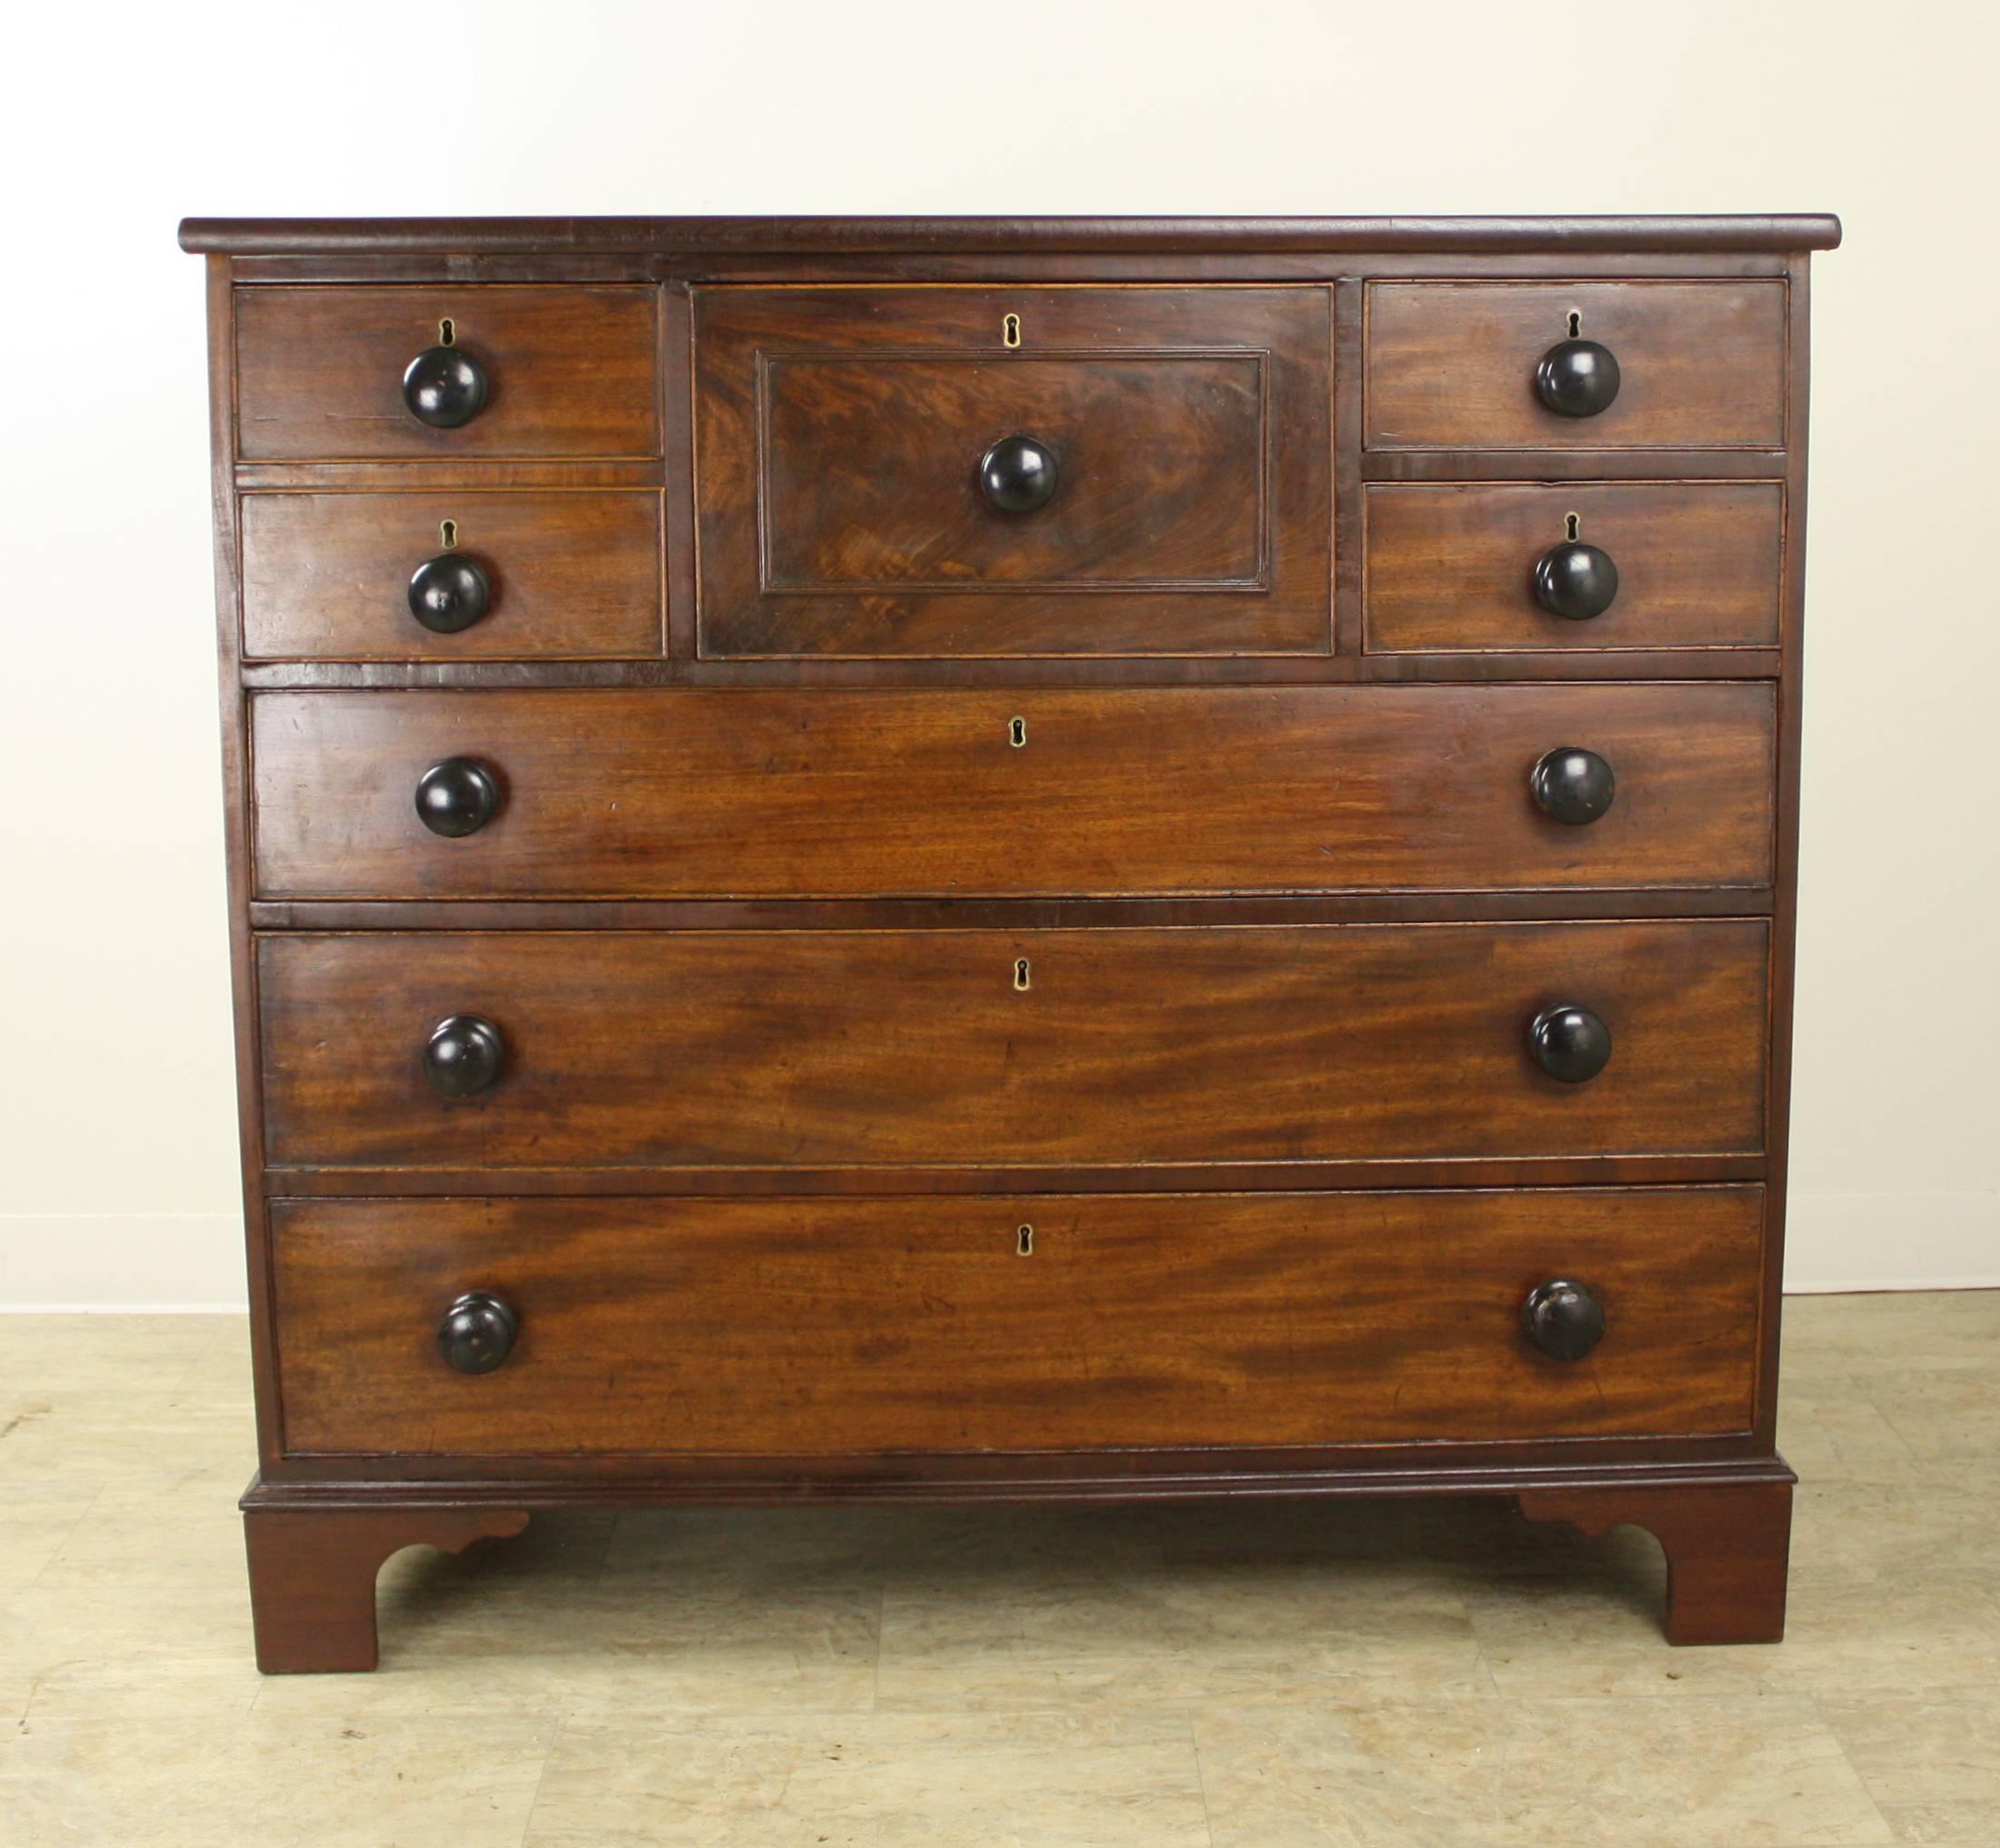 A splendid mahogany chest of drawers, with one deep center drawer, a faux double compartment to the left and two small ones to the right. All on top of three roomy lower drawers. Unusual, beautiful, and lots of storage to boot! The mahogany is in